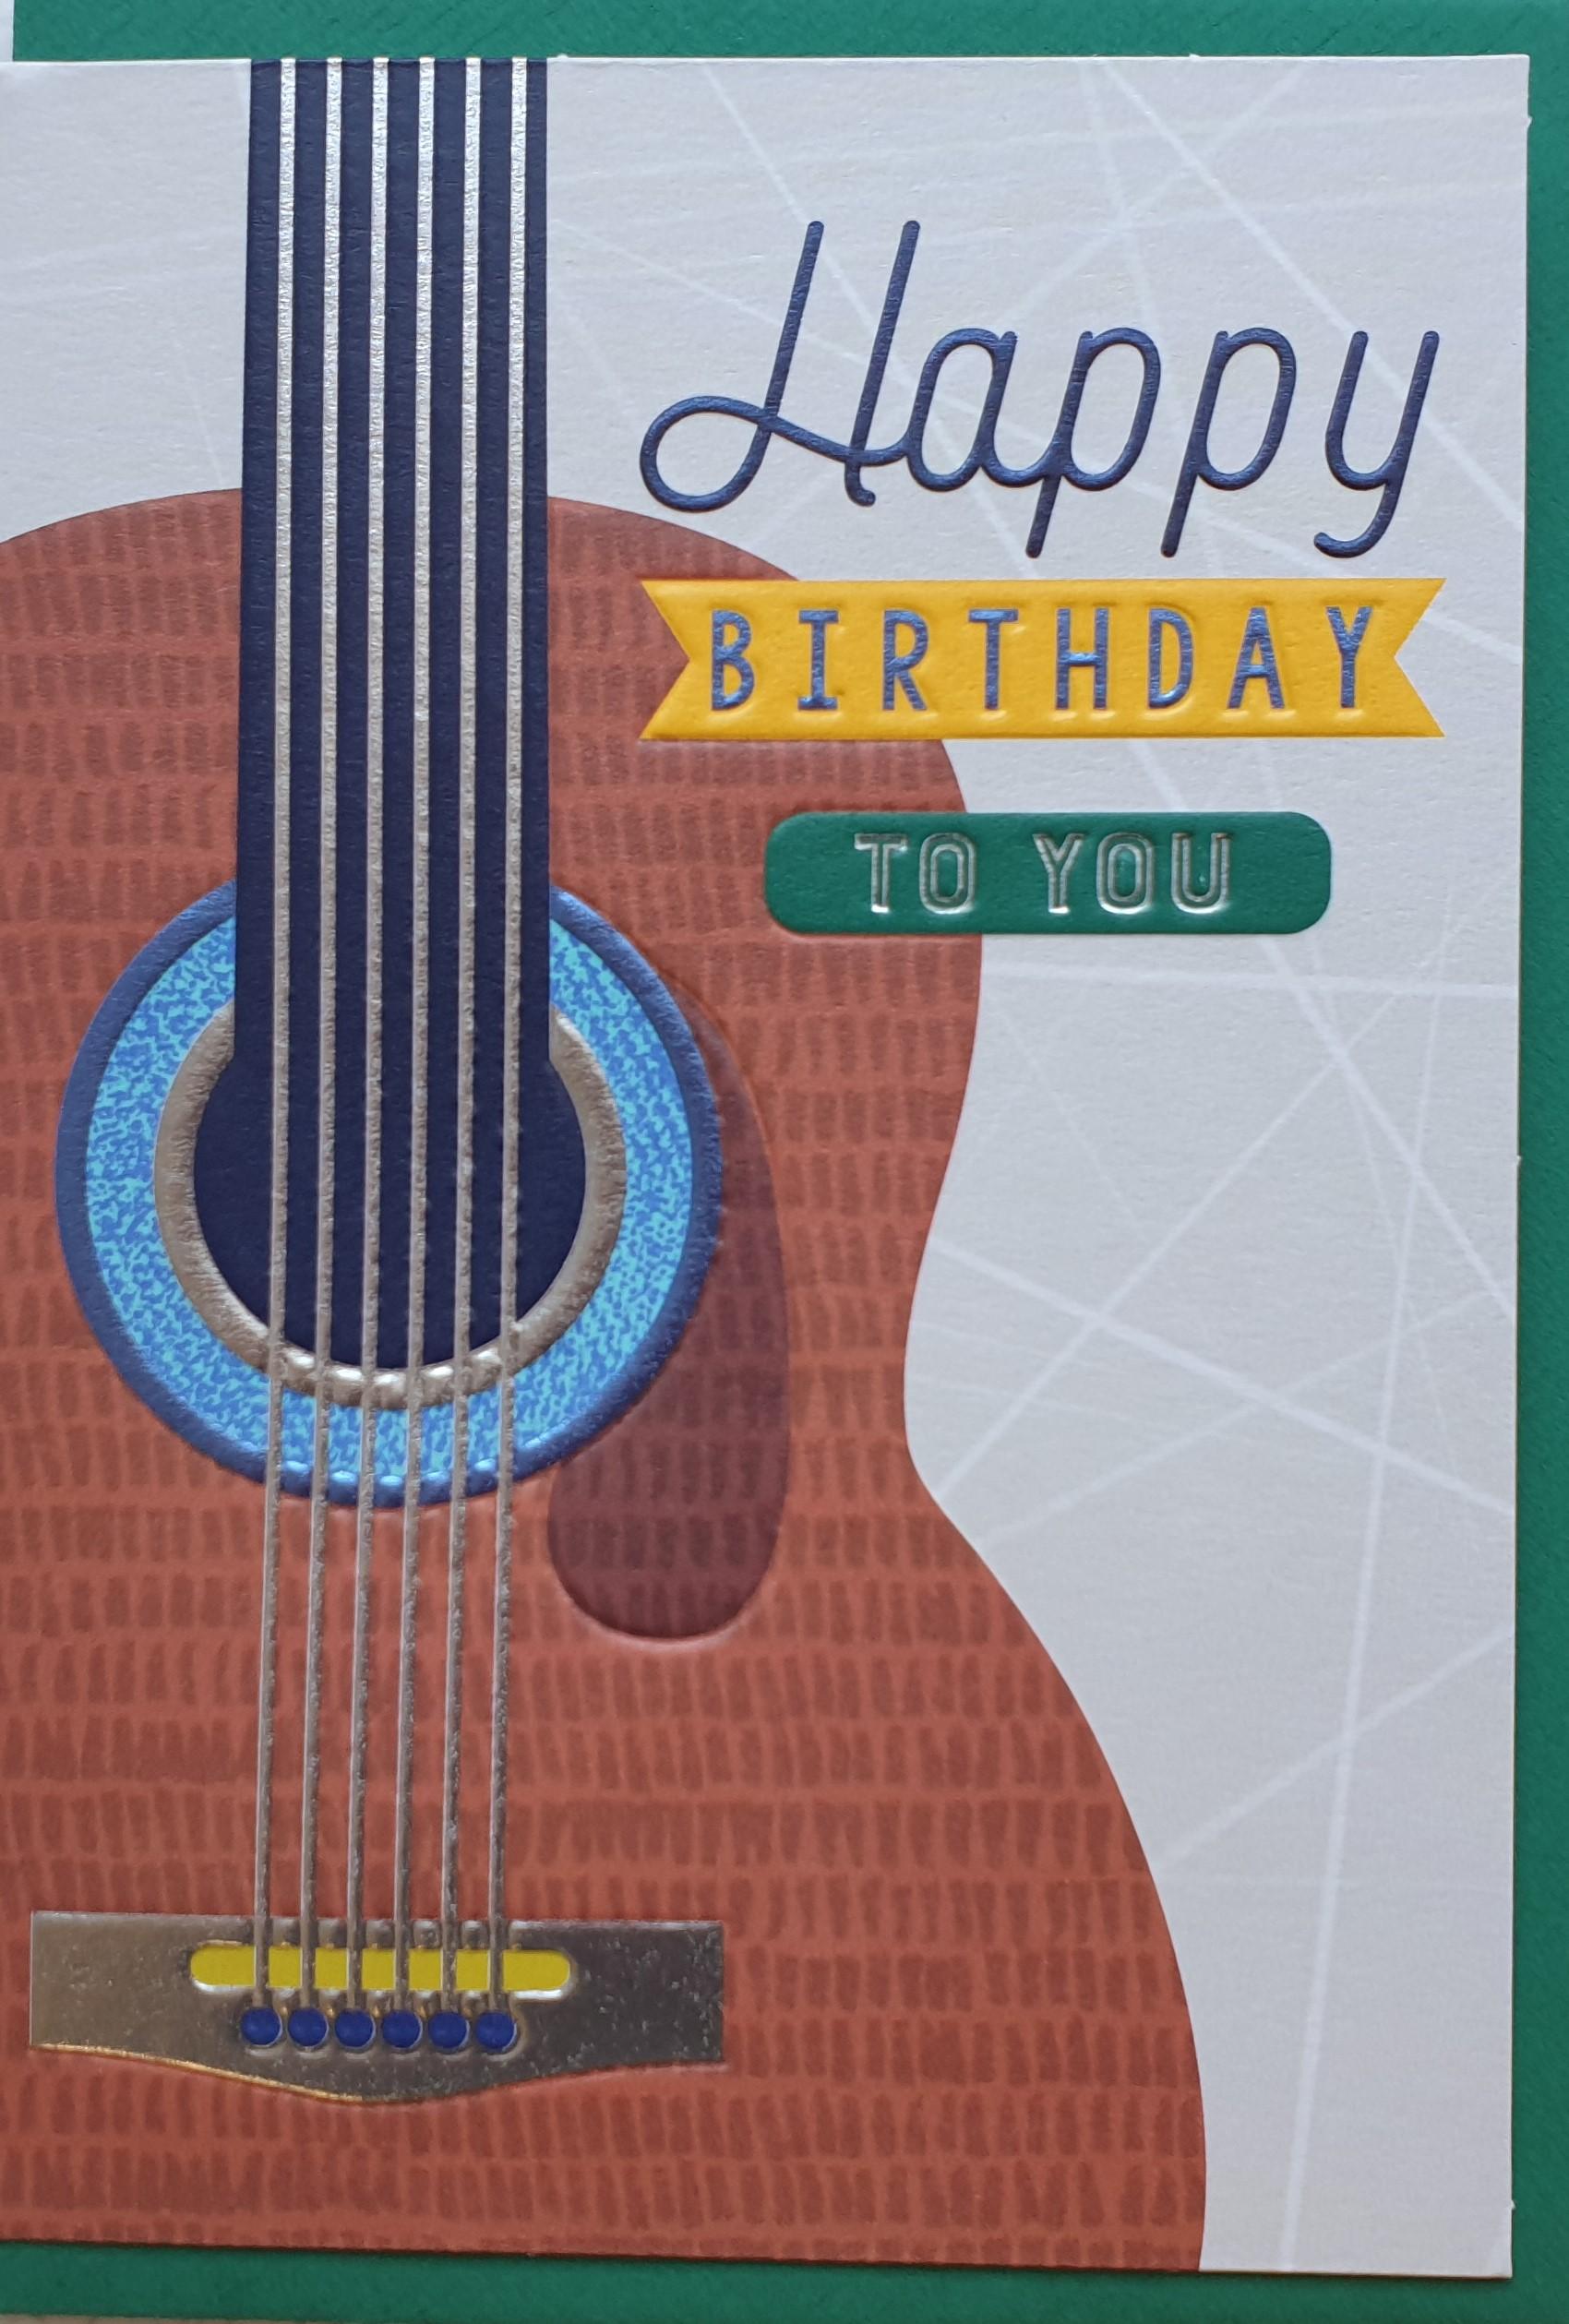 Double card Happy Birthday to you with guitar